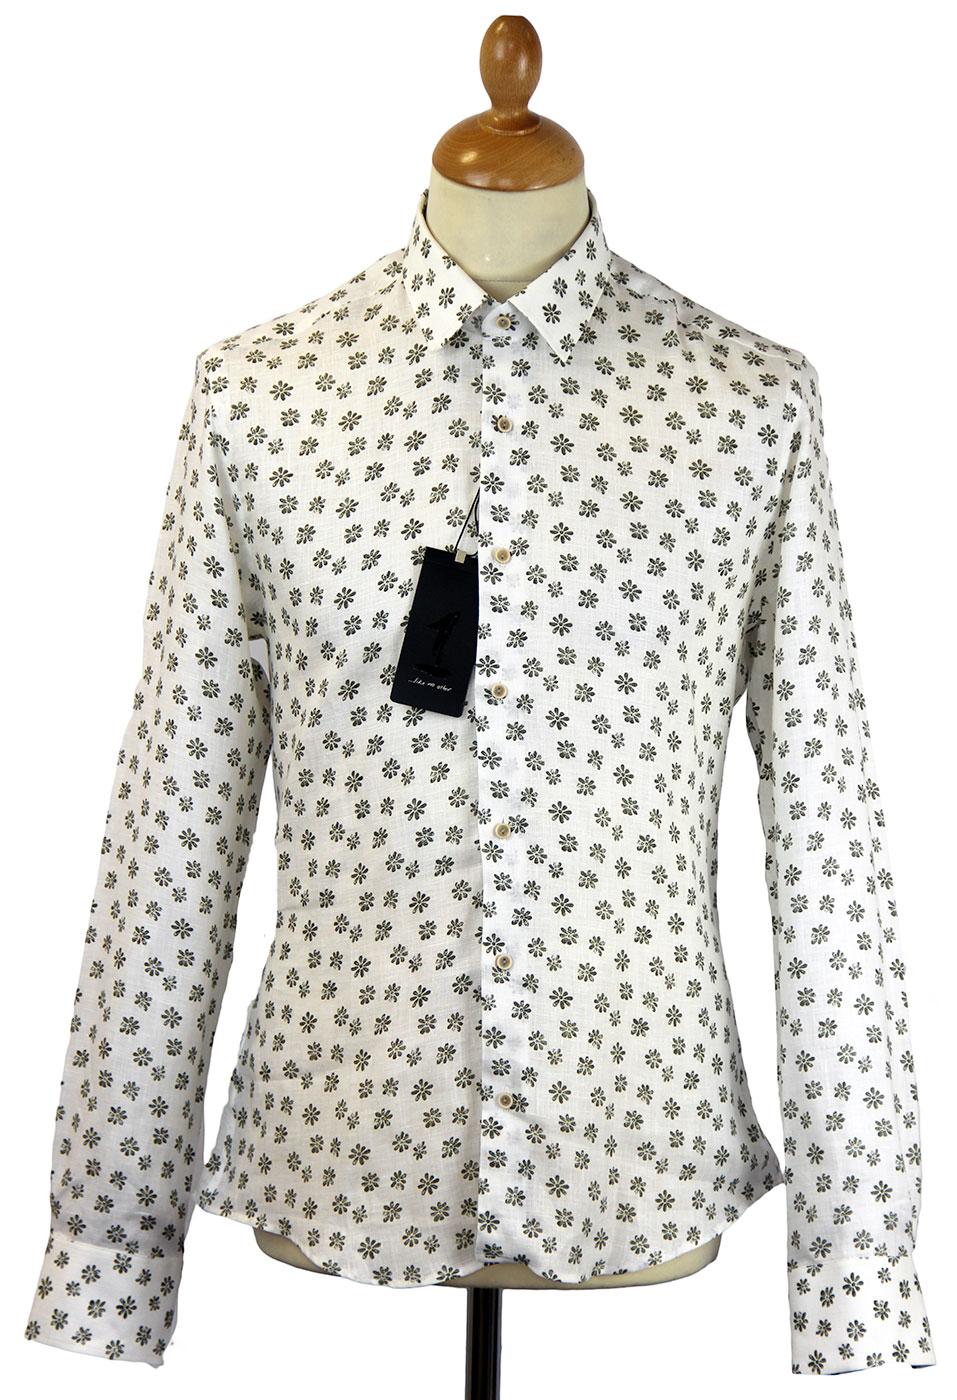 Magenlli 1 LIKE NO OTHER Retro Linen Floral Shirt